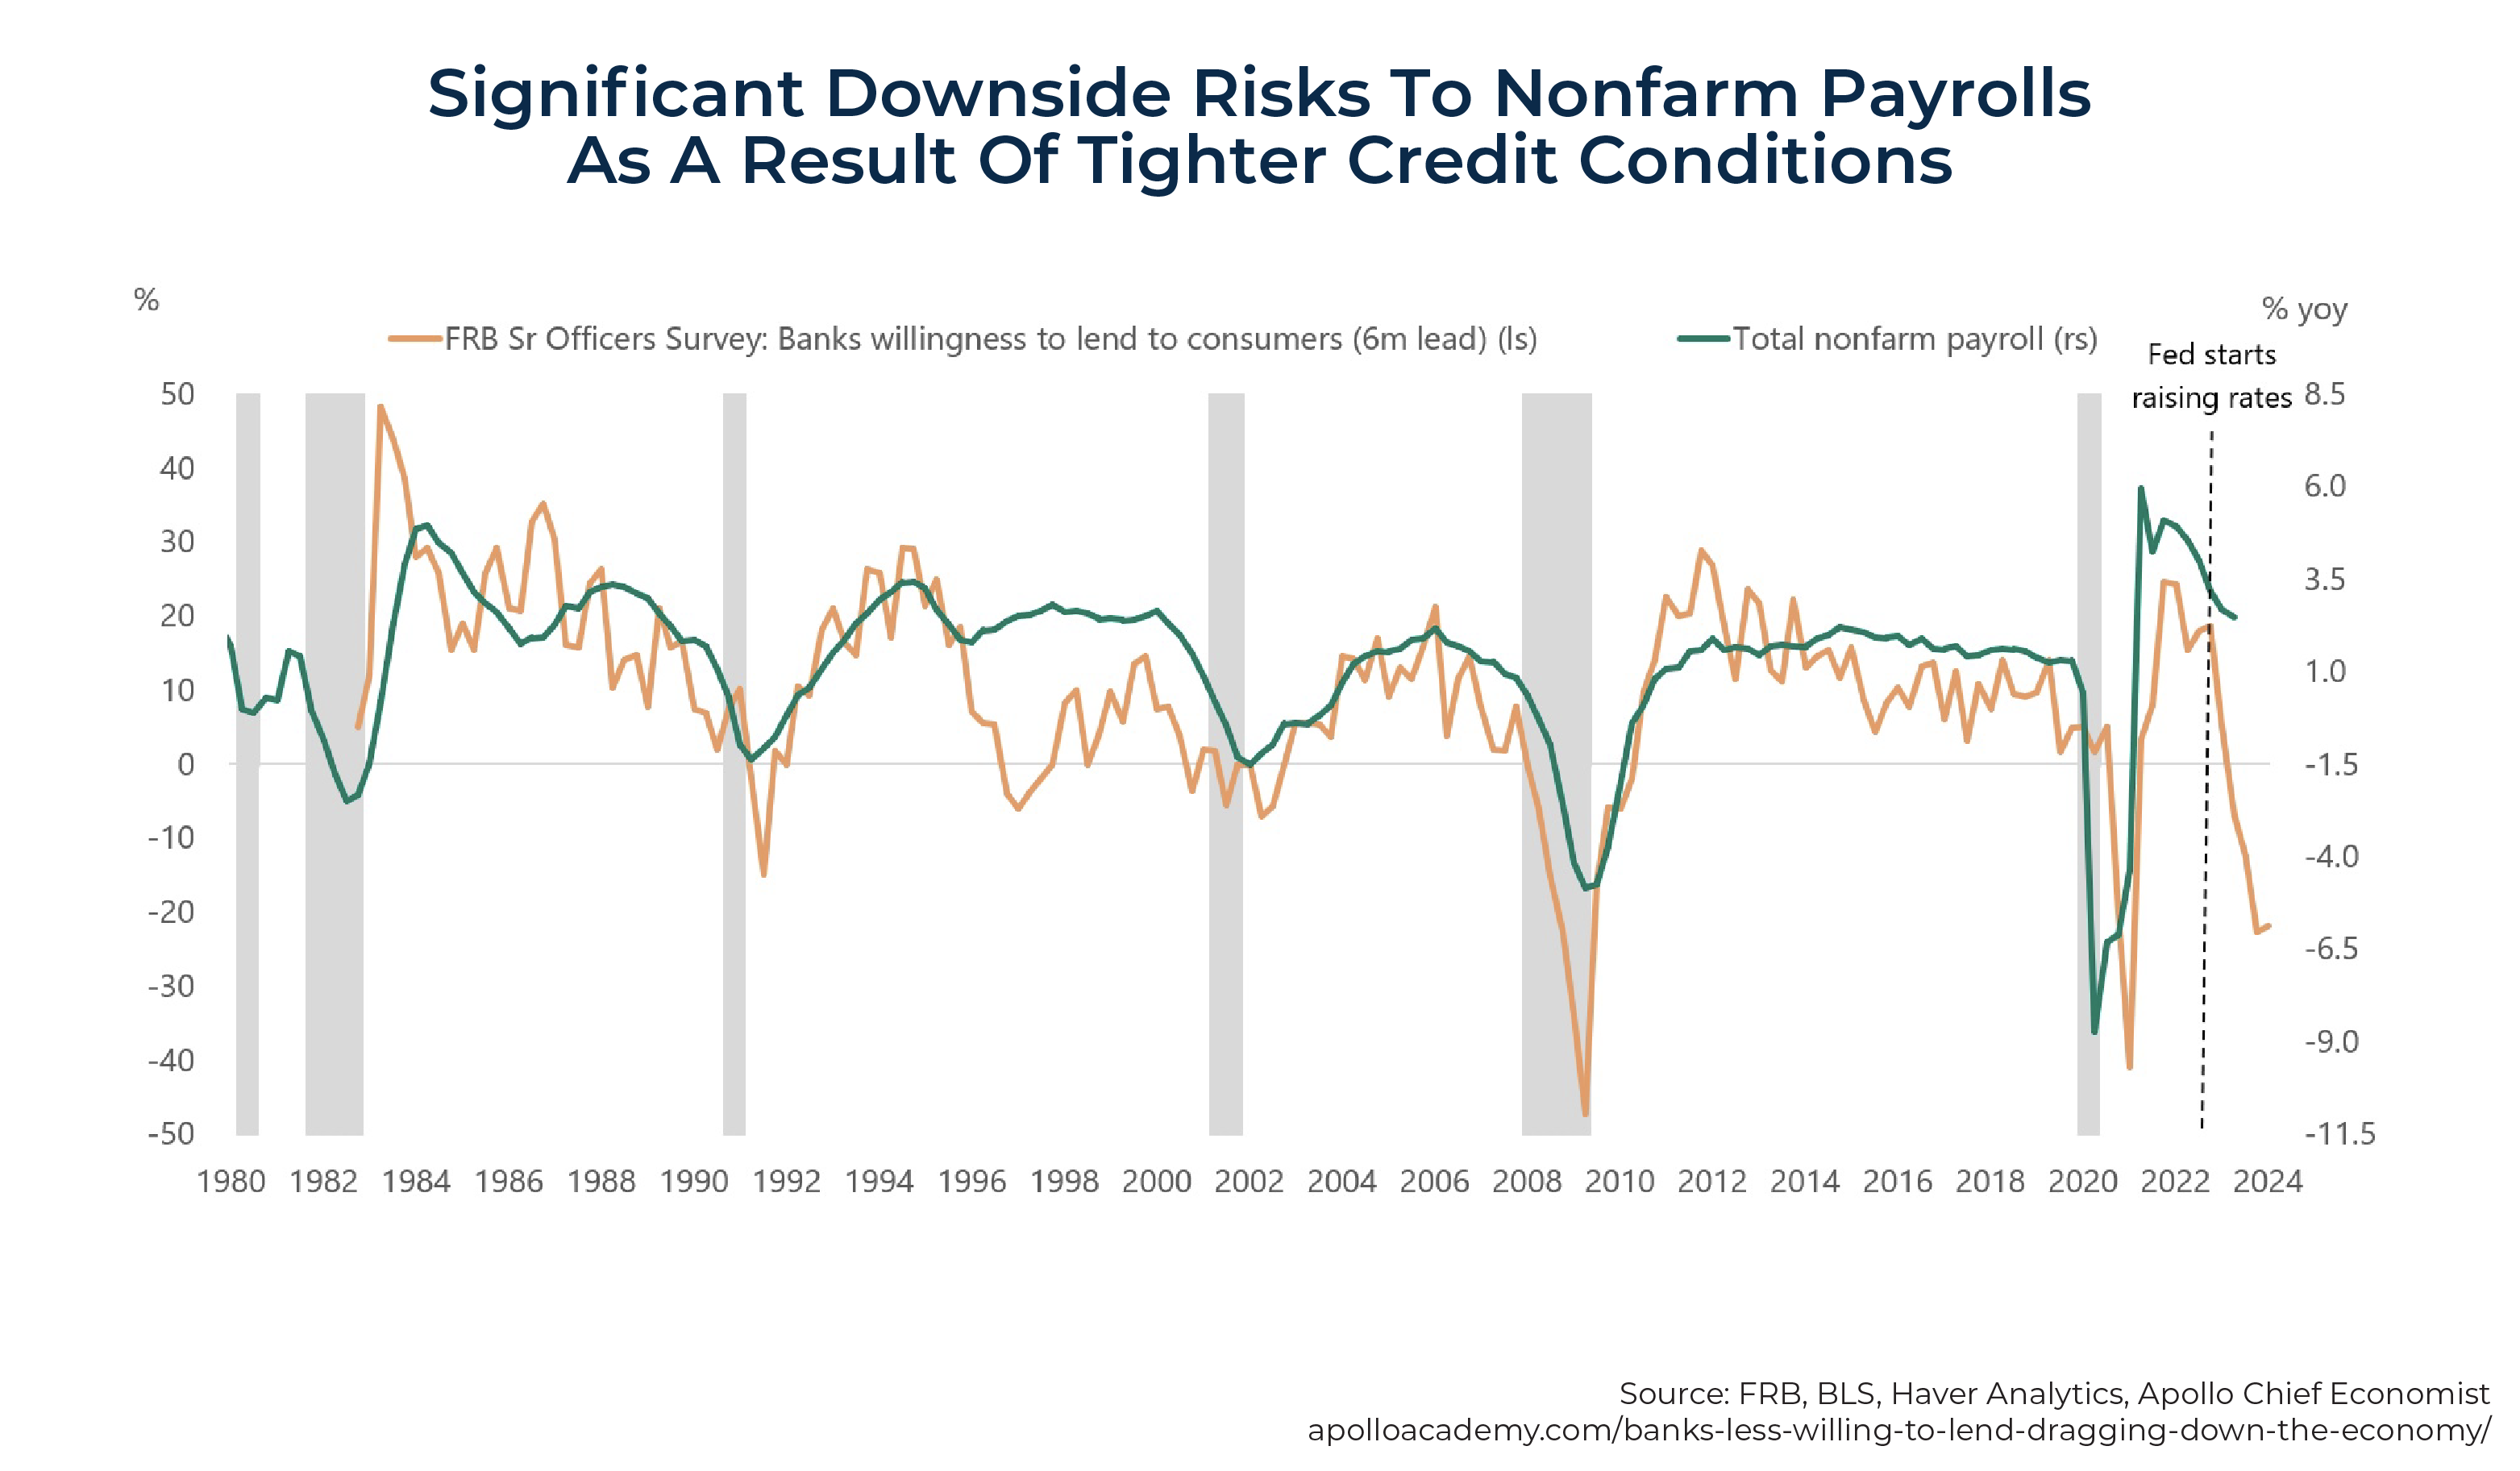 Significant Downside Risks To Nonfarm Payrolls As A Result Of Tighter Credit Conditions